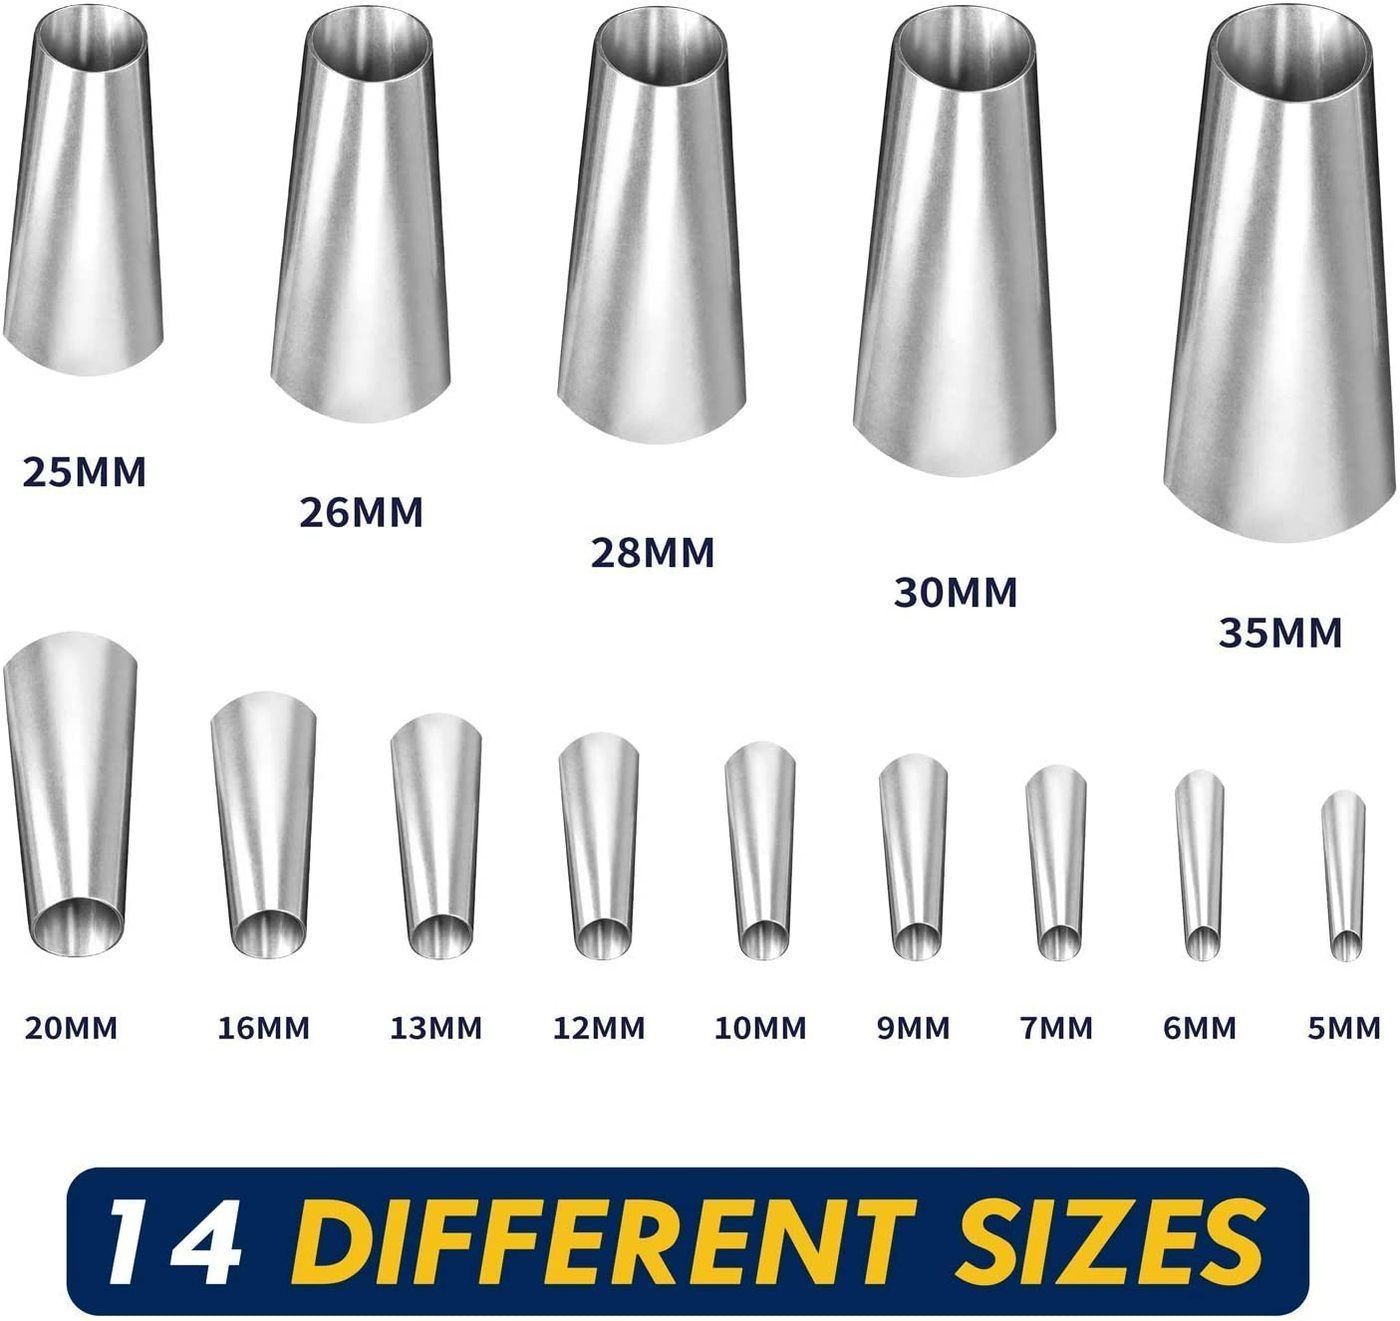 Stainless Steel Sealing Nozzle (14pcs)